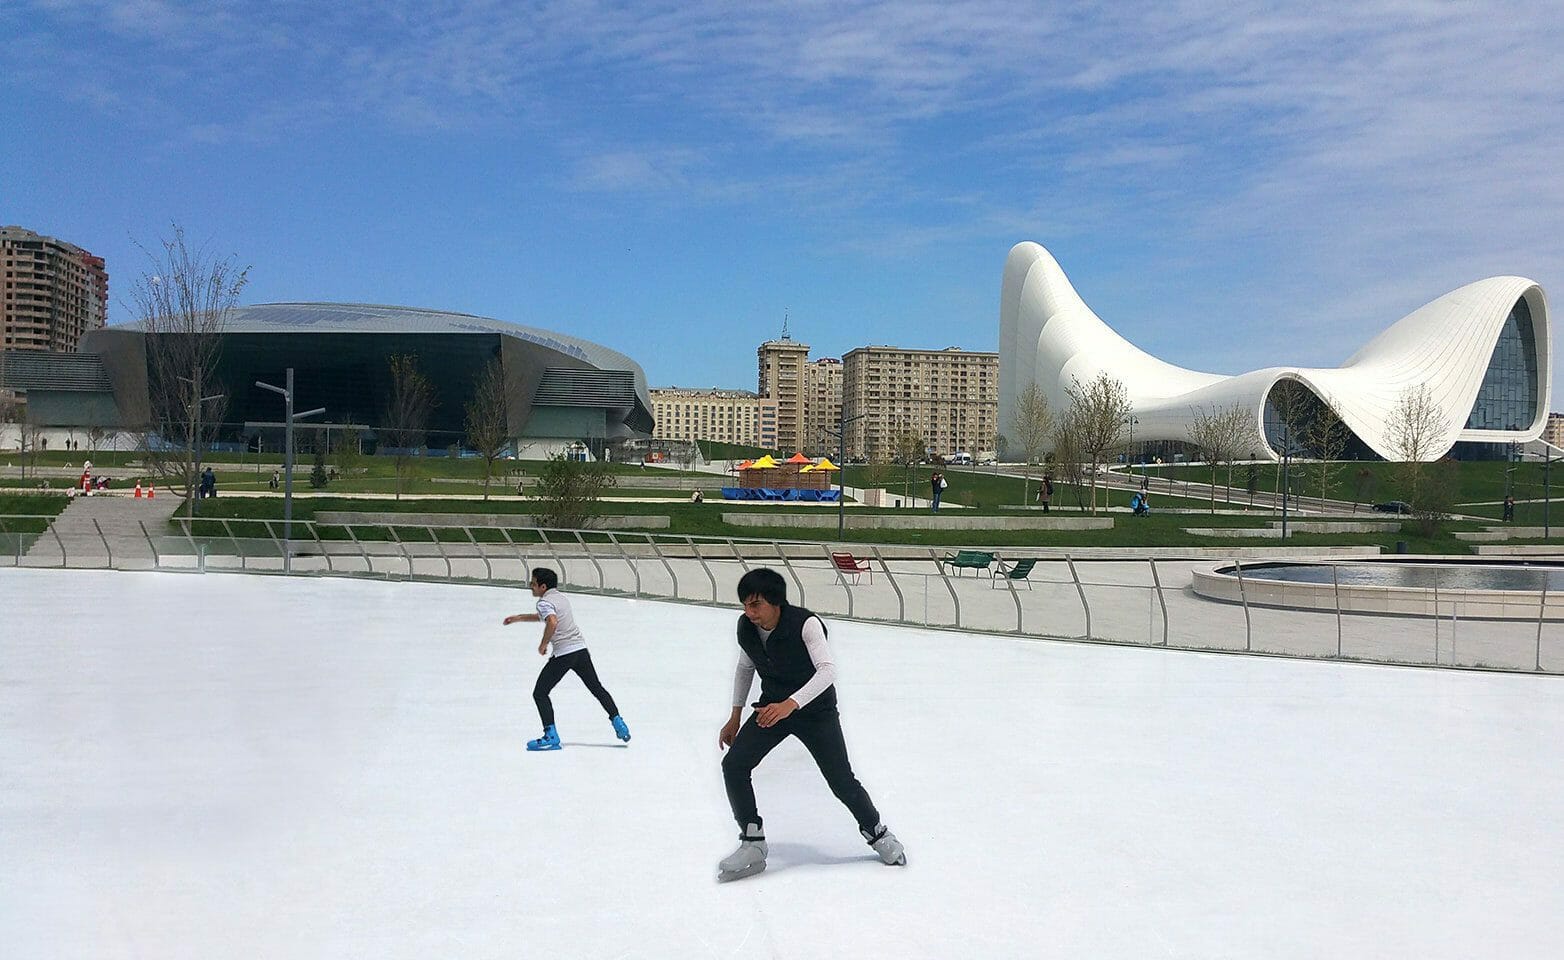 The world’s largest synthetic ice rink in Azerbaijan